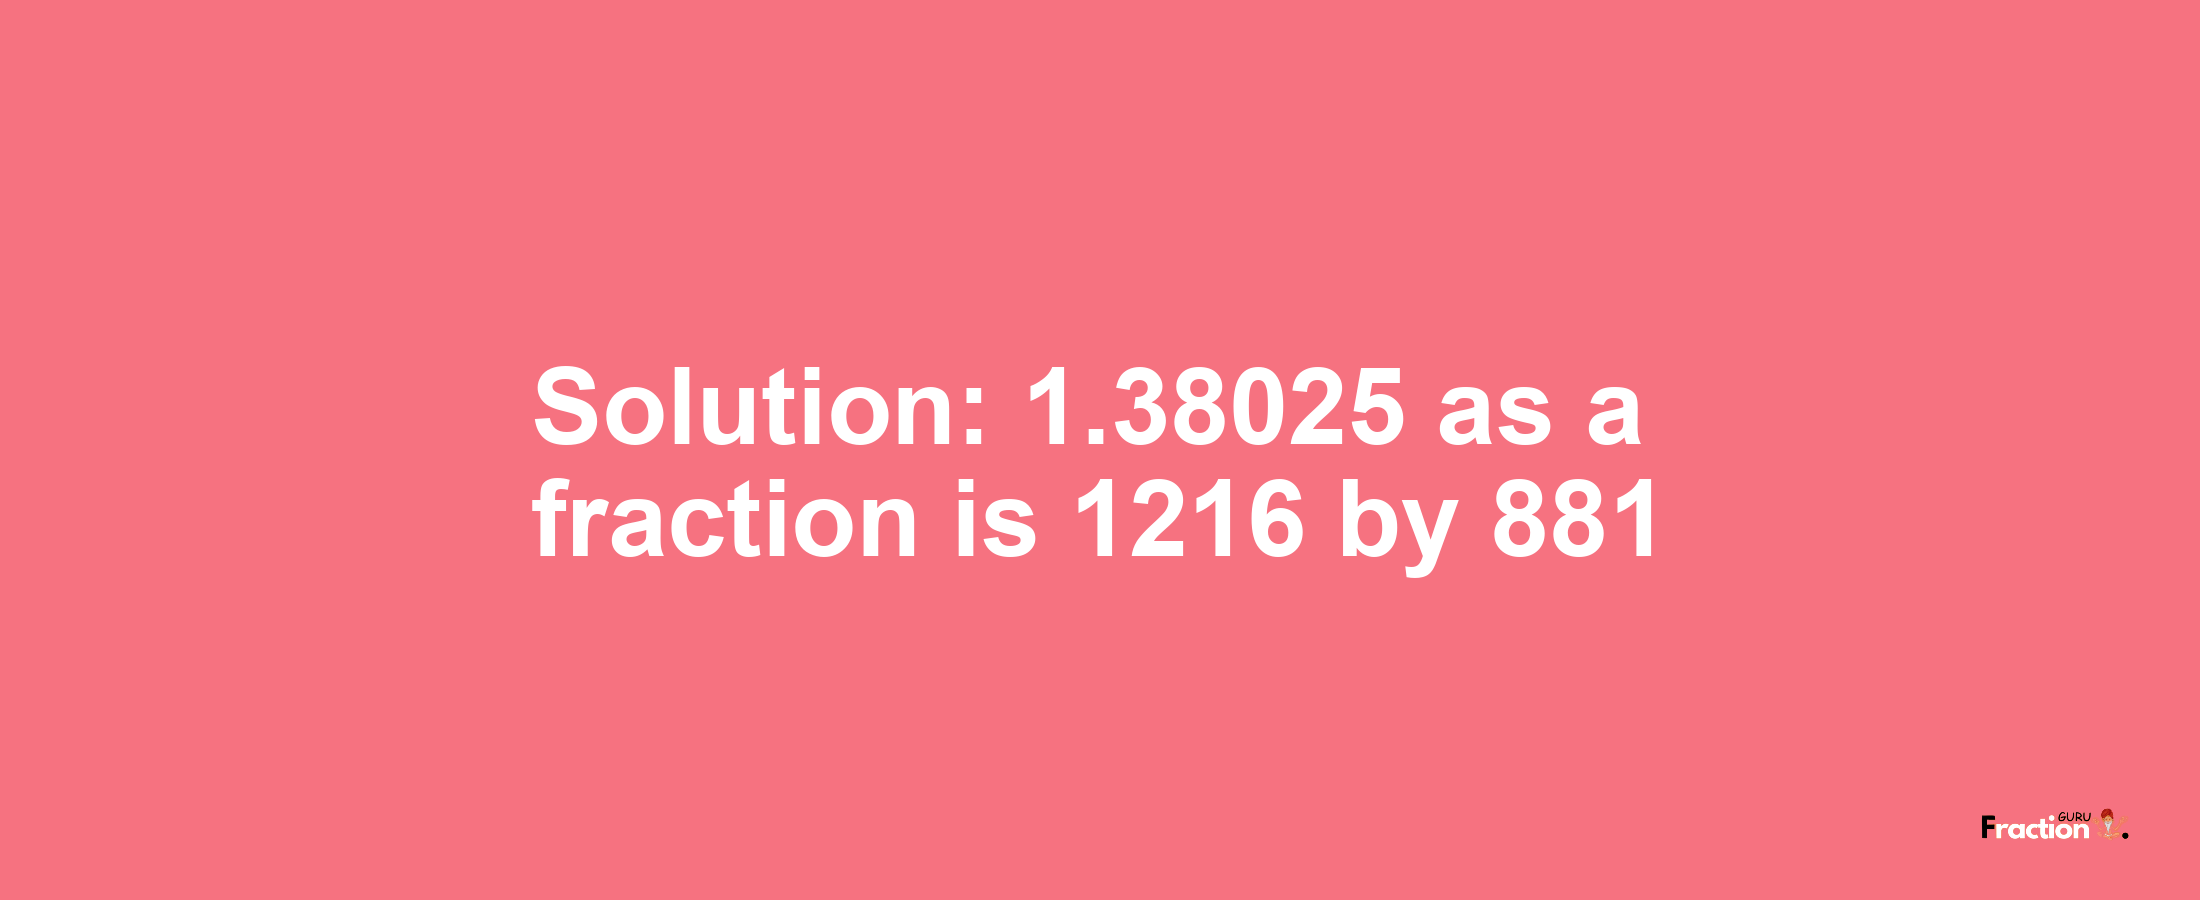 Solution:1.38025 as a fraction is 1216/881